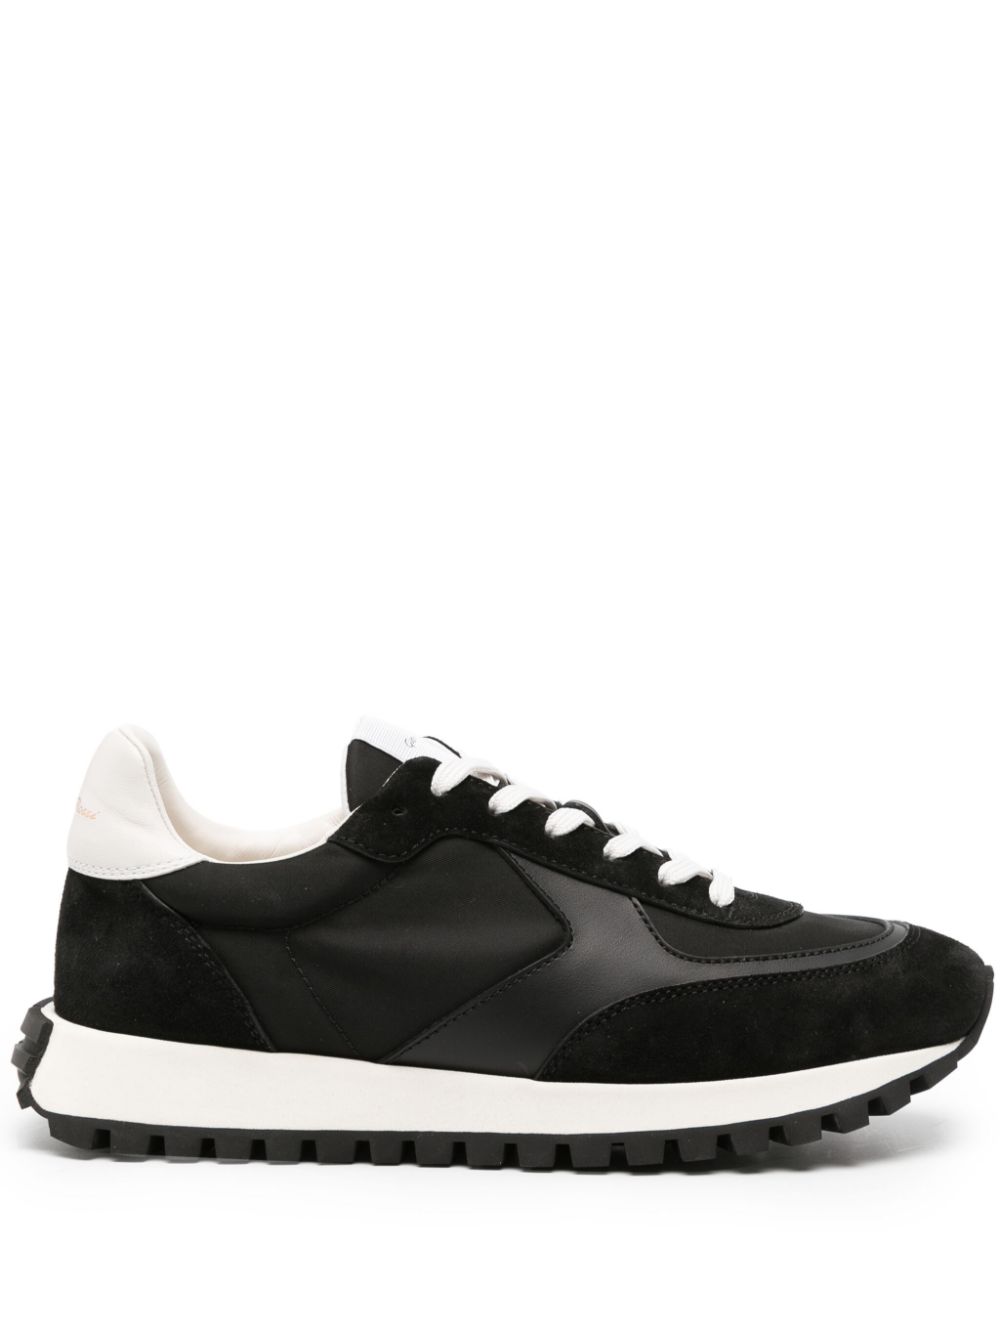 Gianvito Rossi Gravel Panelled Suede Sneakers In Black